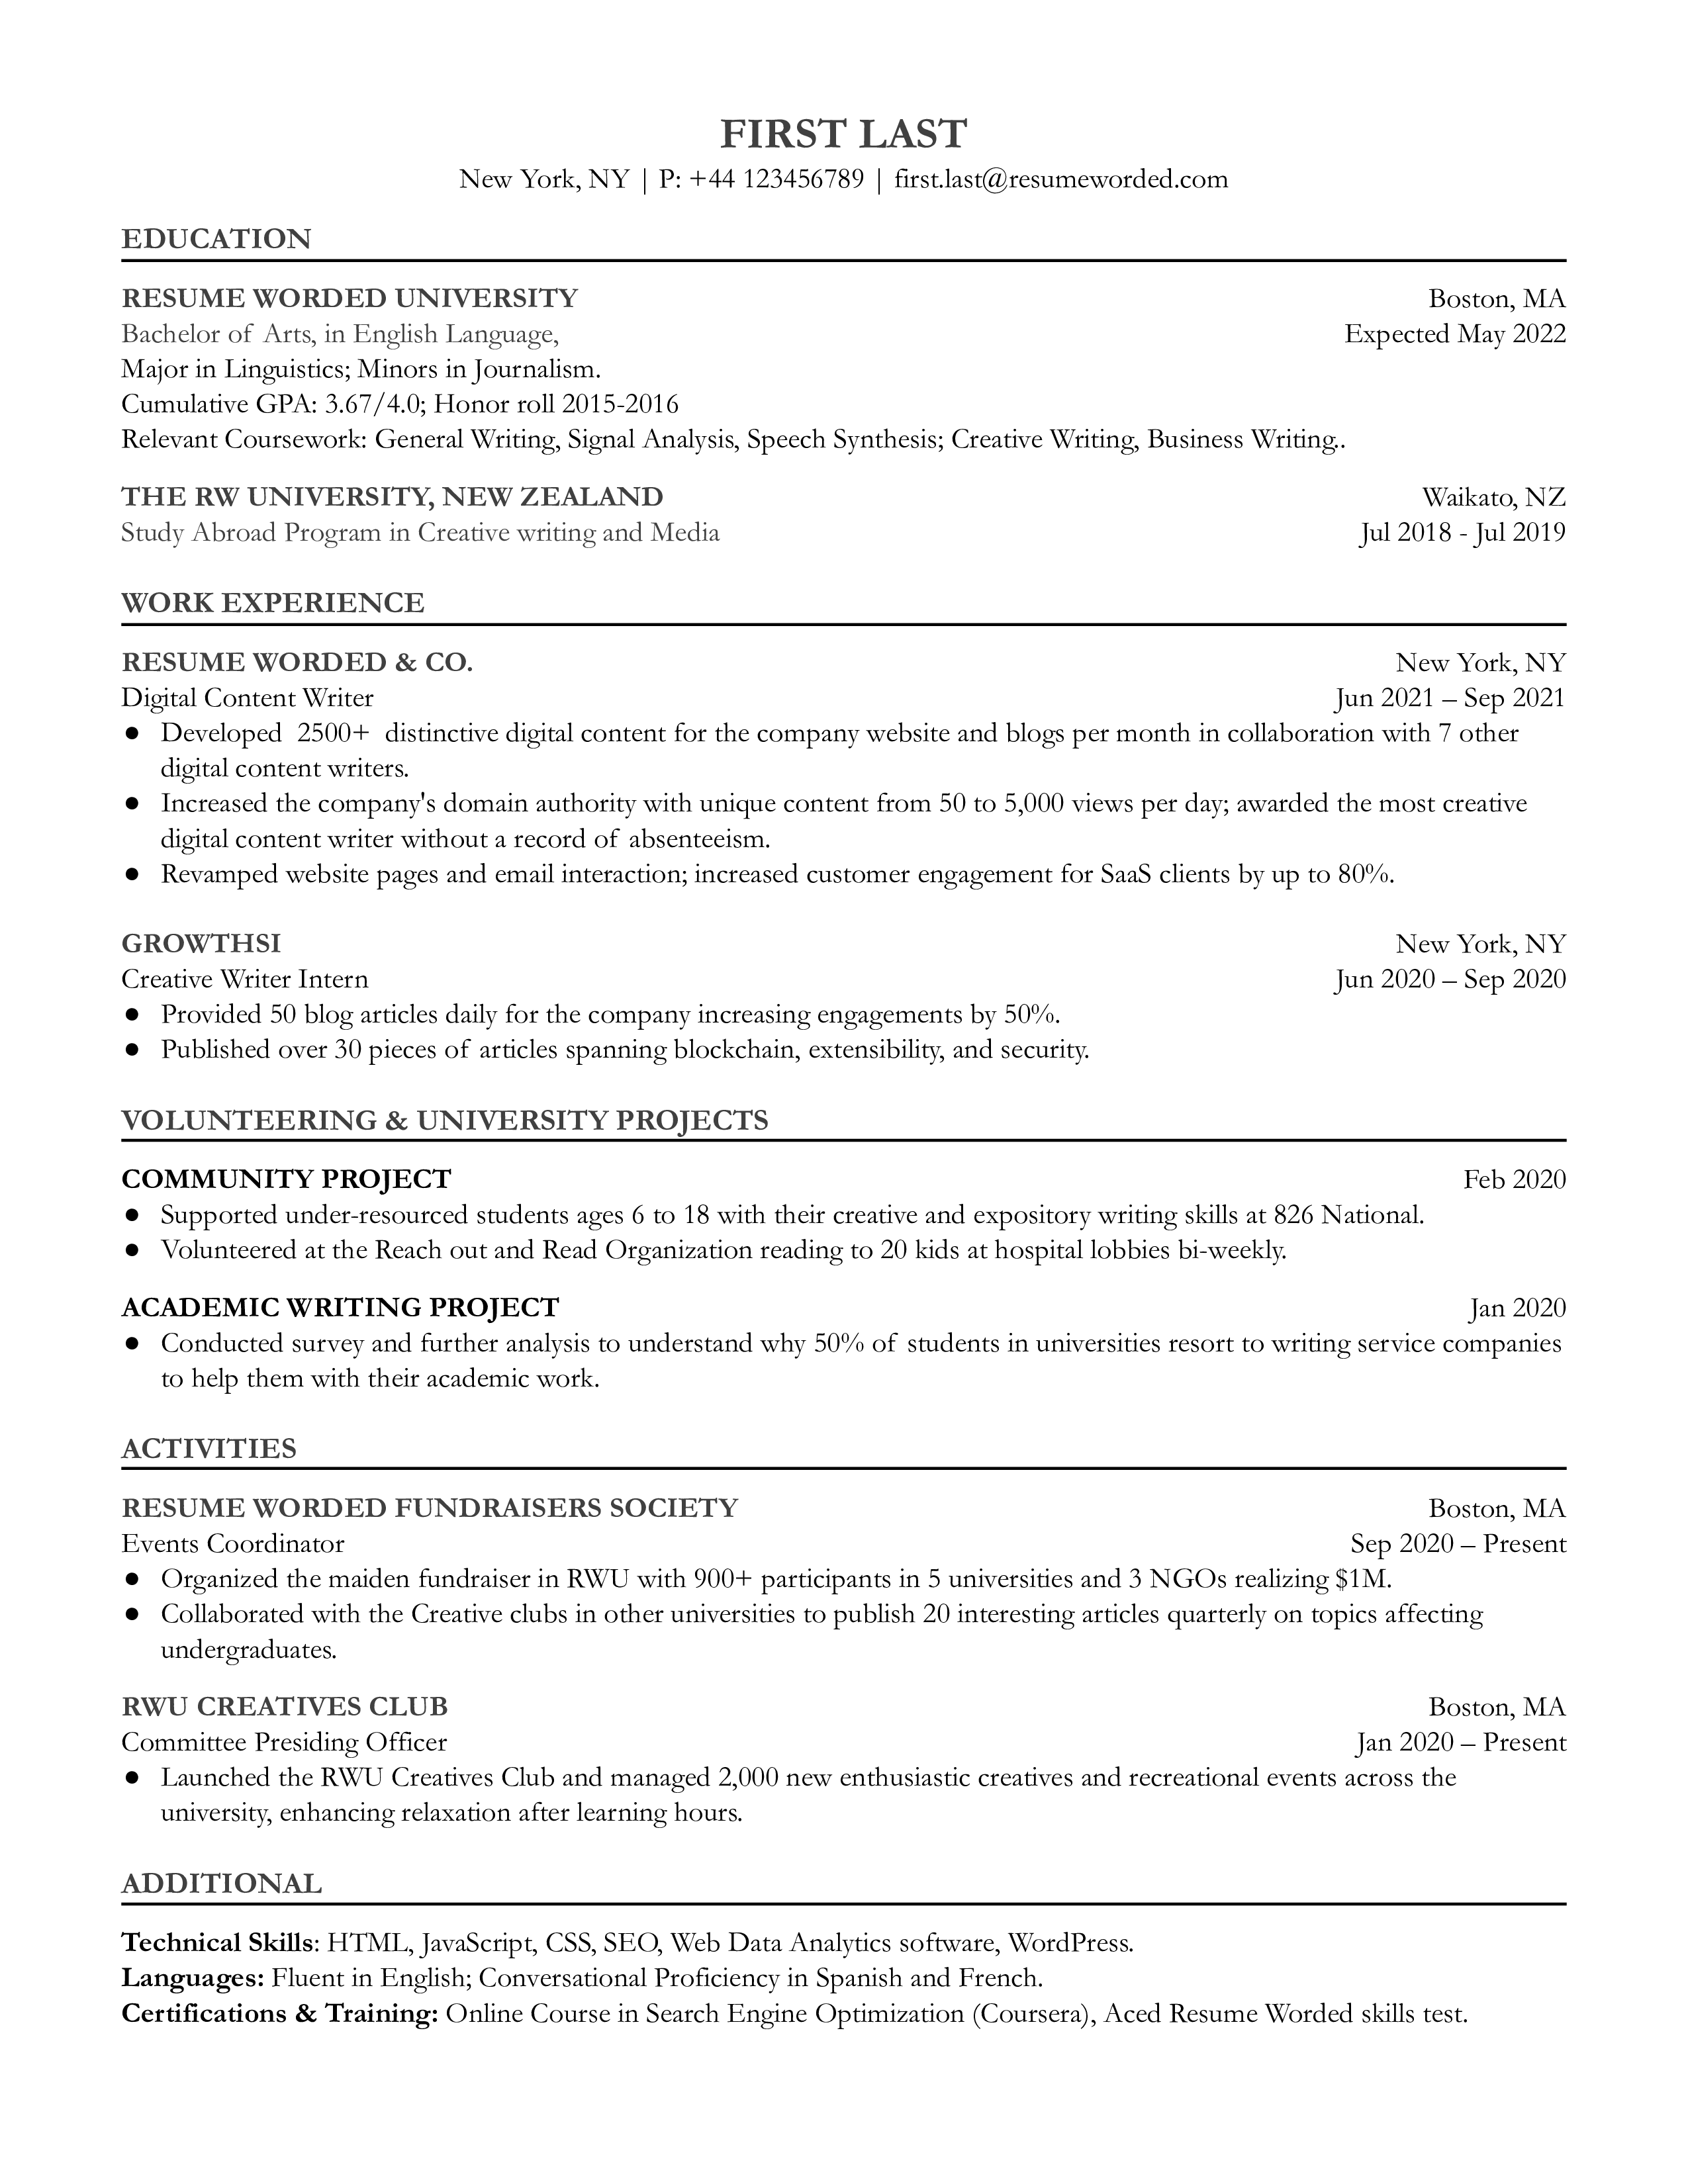 A digital content writer resume sample that highlights the applicant’s digital focussed skill set and non-paying experience.